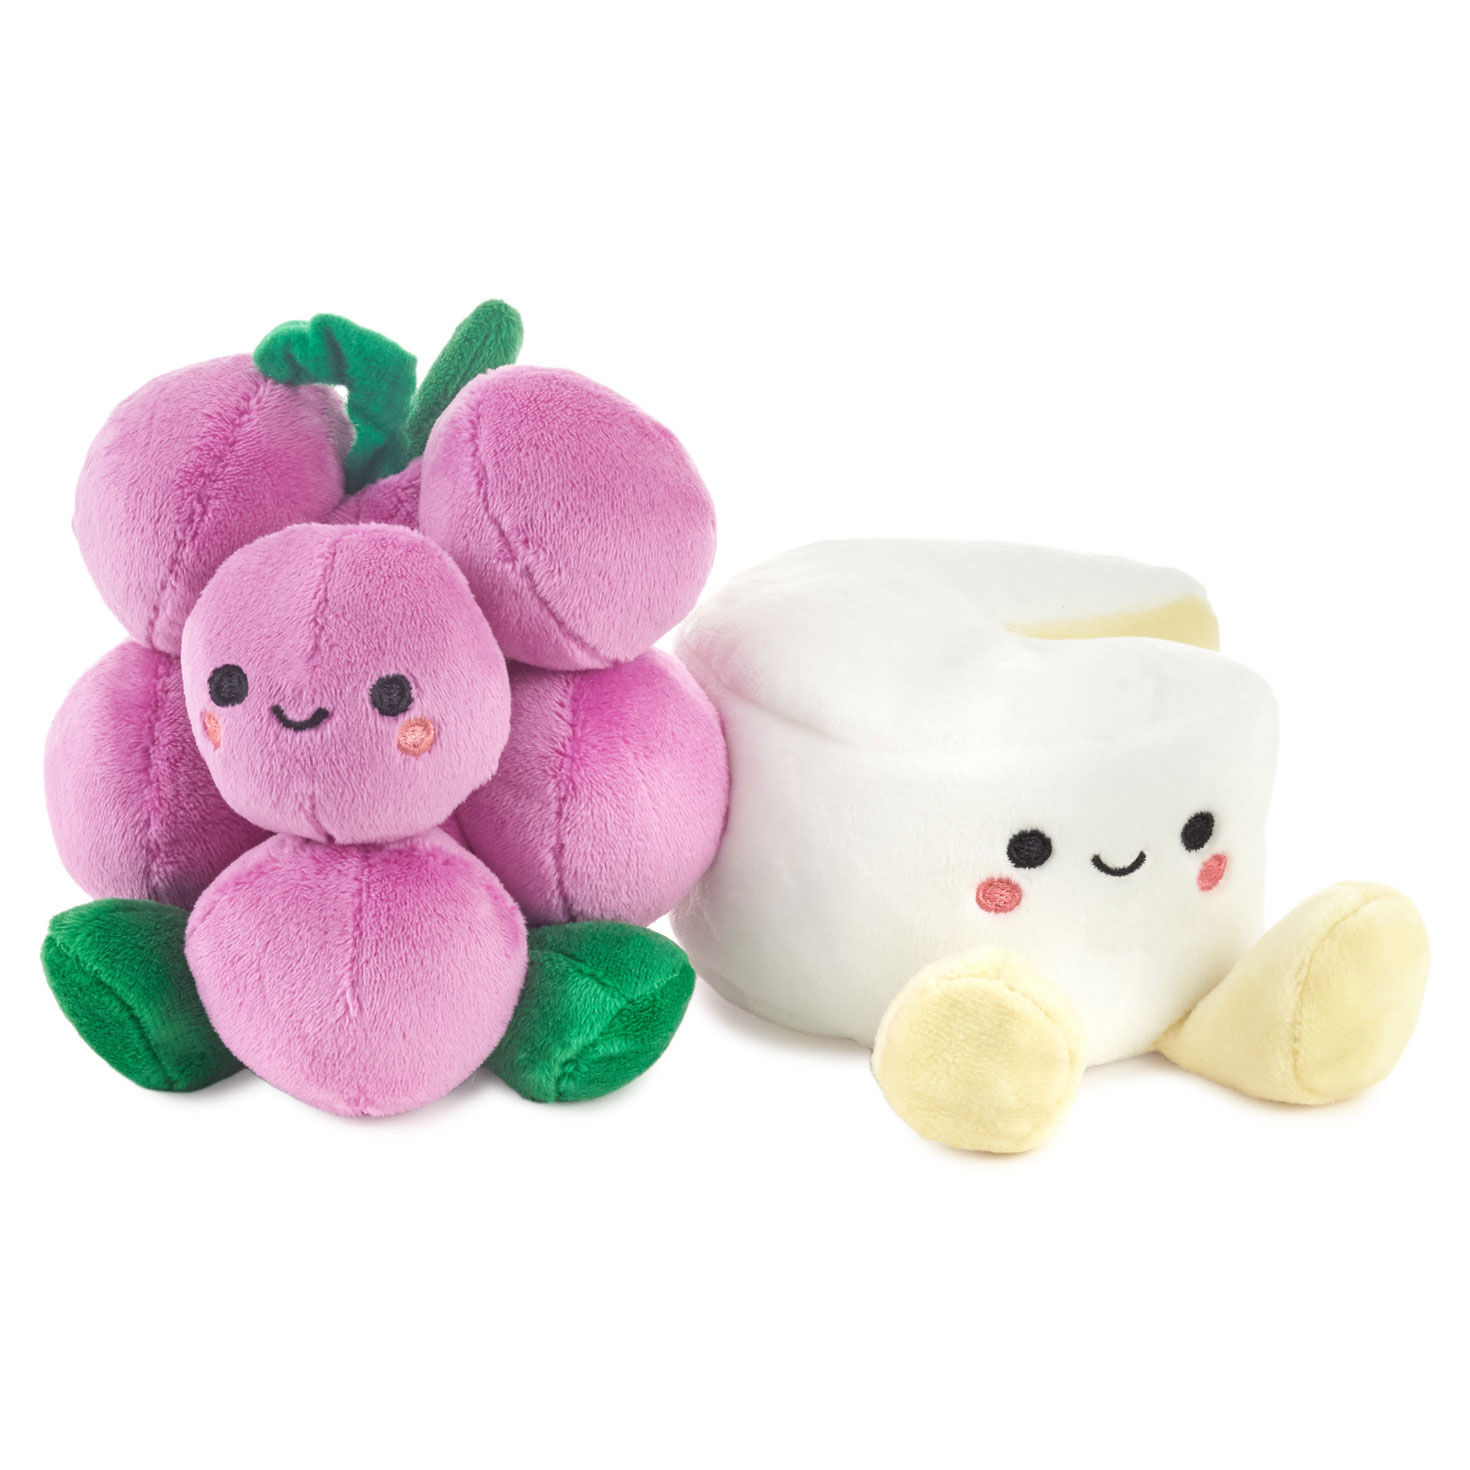 Better Together Grapes and Cheese Magnetic Plush, 5.75" for only USD 16.99 | Hallmark